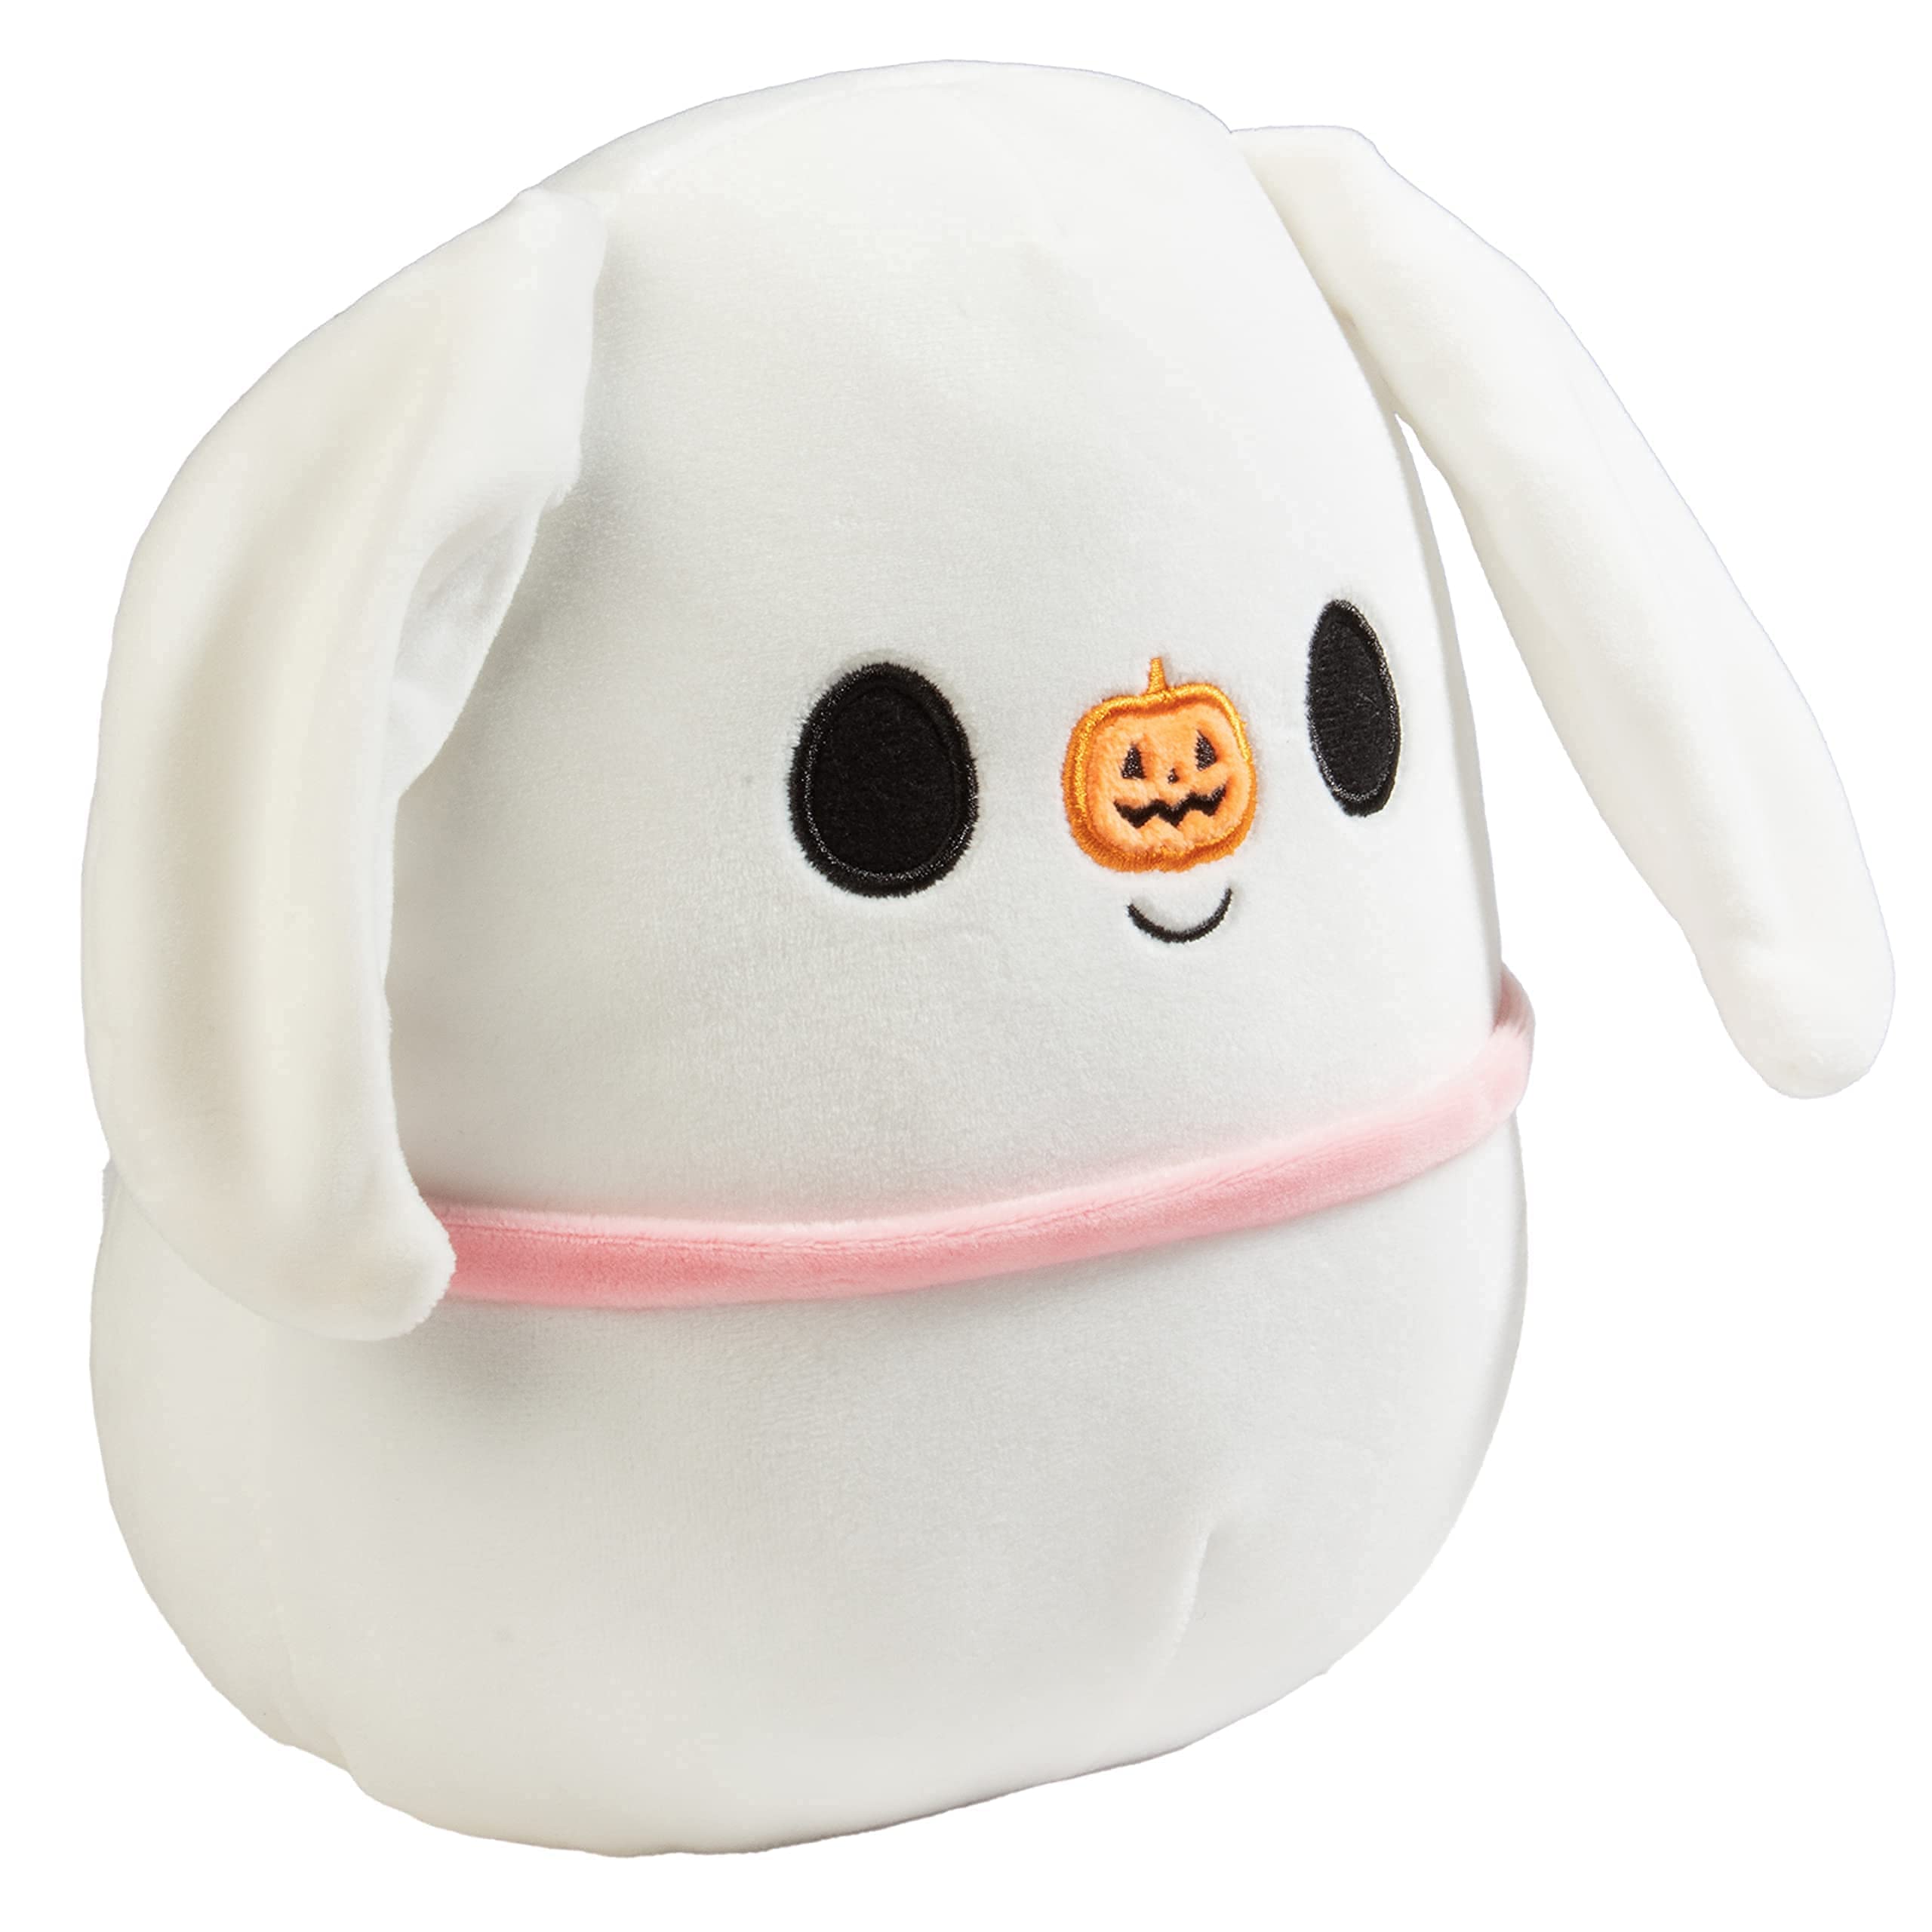 Squishmallows 8" Zero - Officially Licensed Kellytoy Halloween Plush - Collectible Soft & Squishy Dog Stuffed Animal Toy - Nightmare Before for Kids, Girls & Boys - 8 Inch